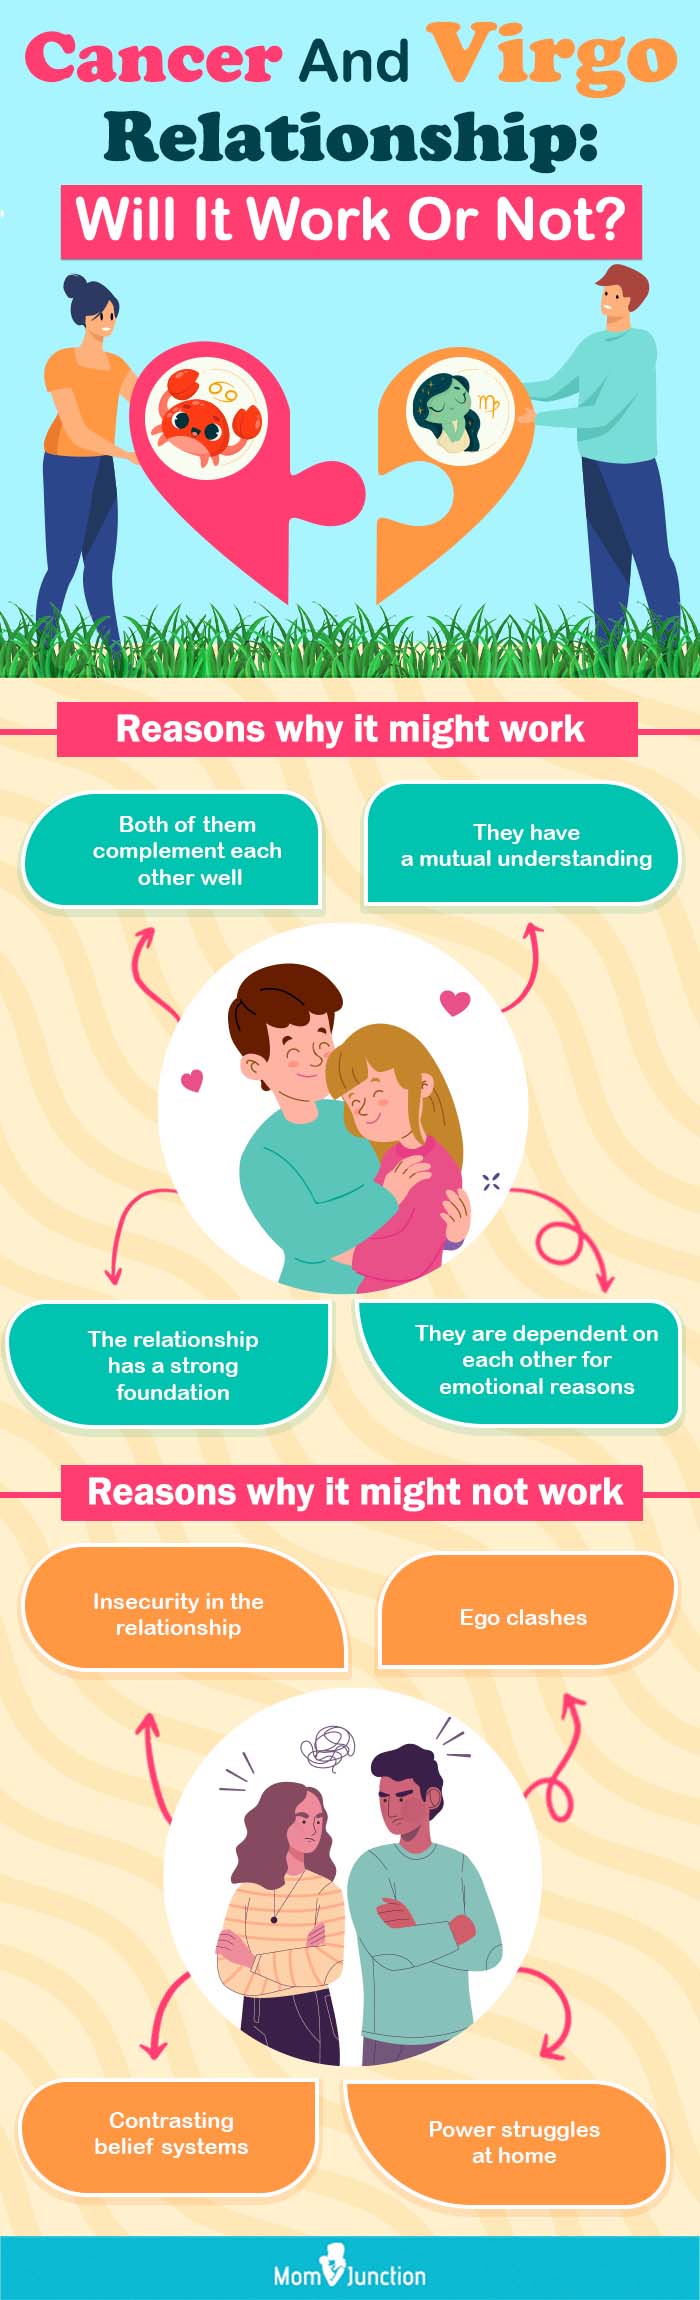 cancer and virgo relationship (infographic)